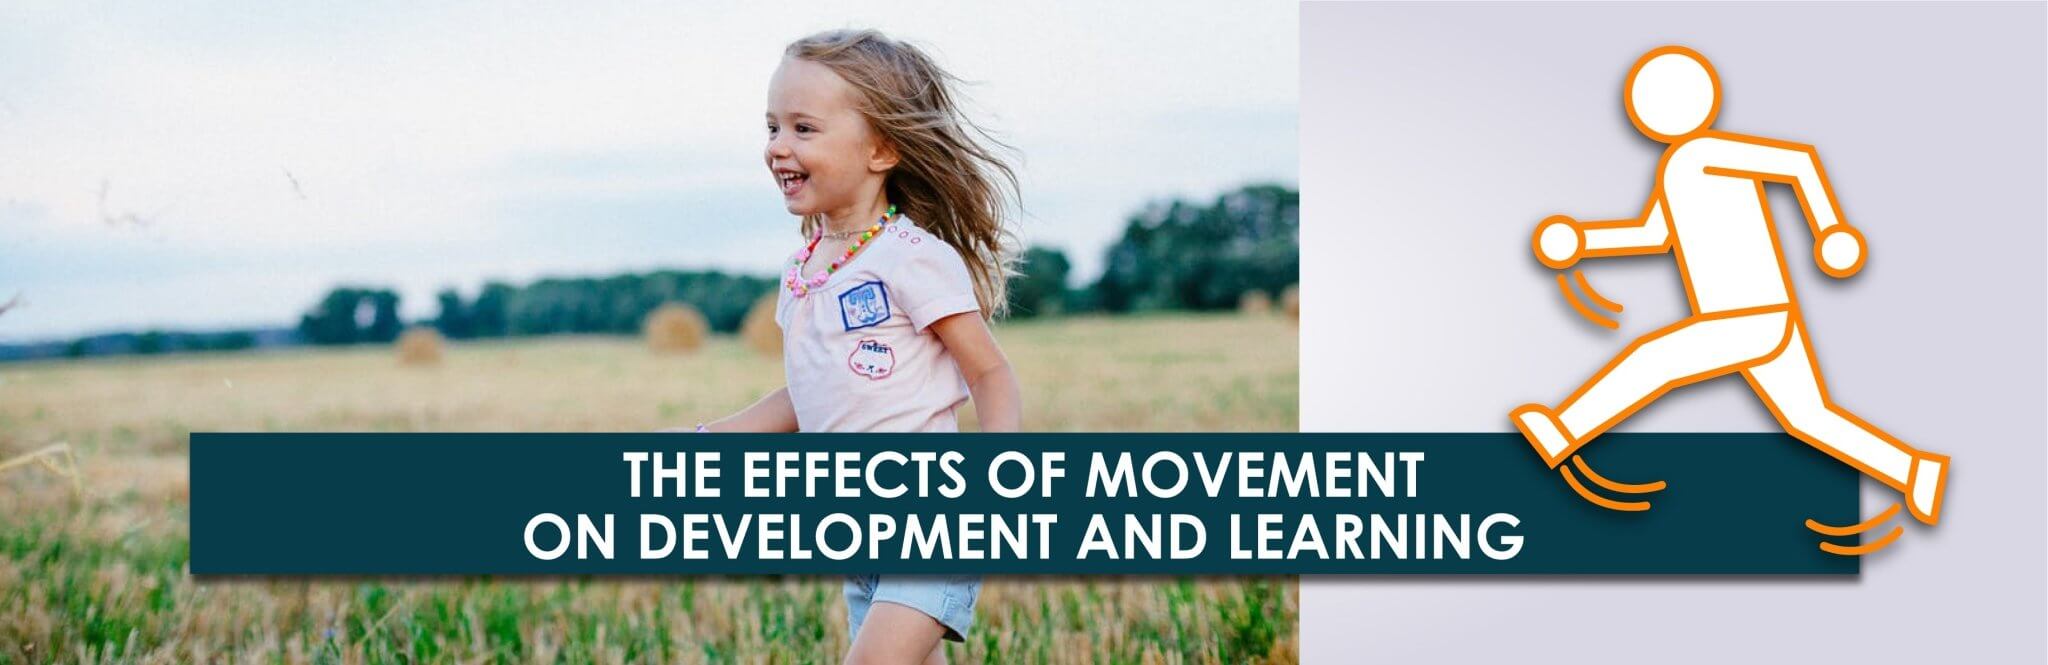 The Effects of Movement on Development and Learning